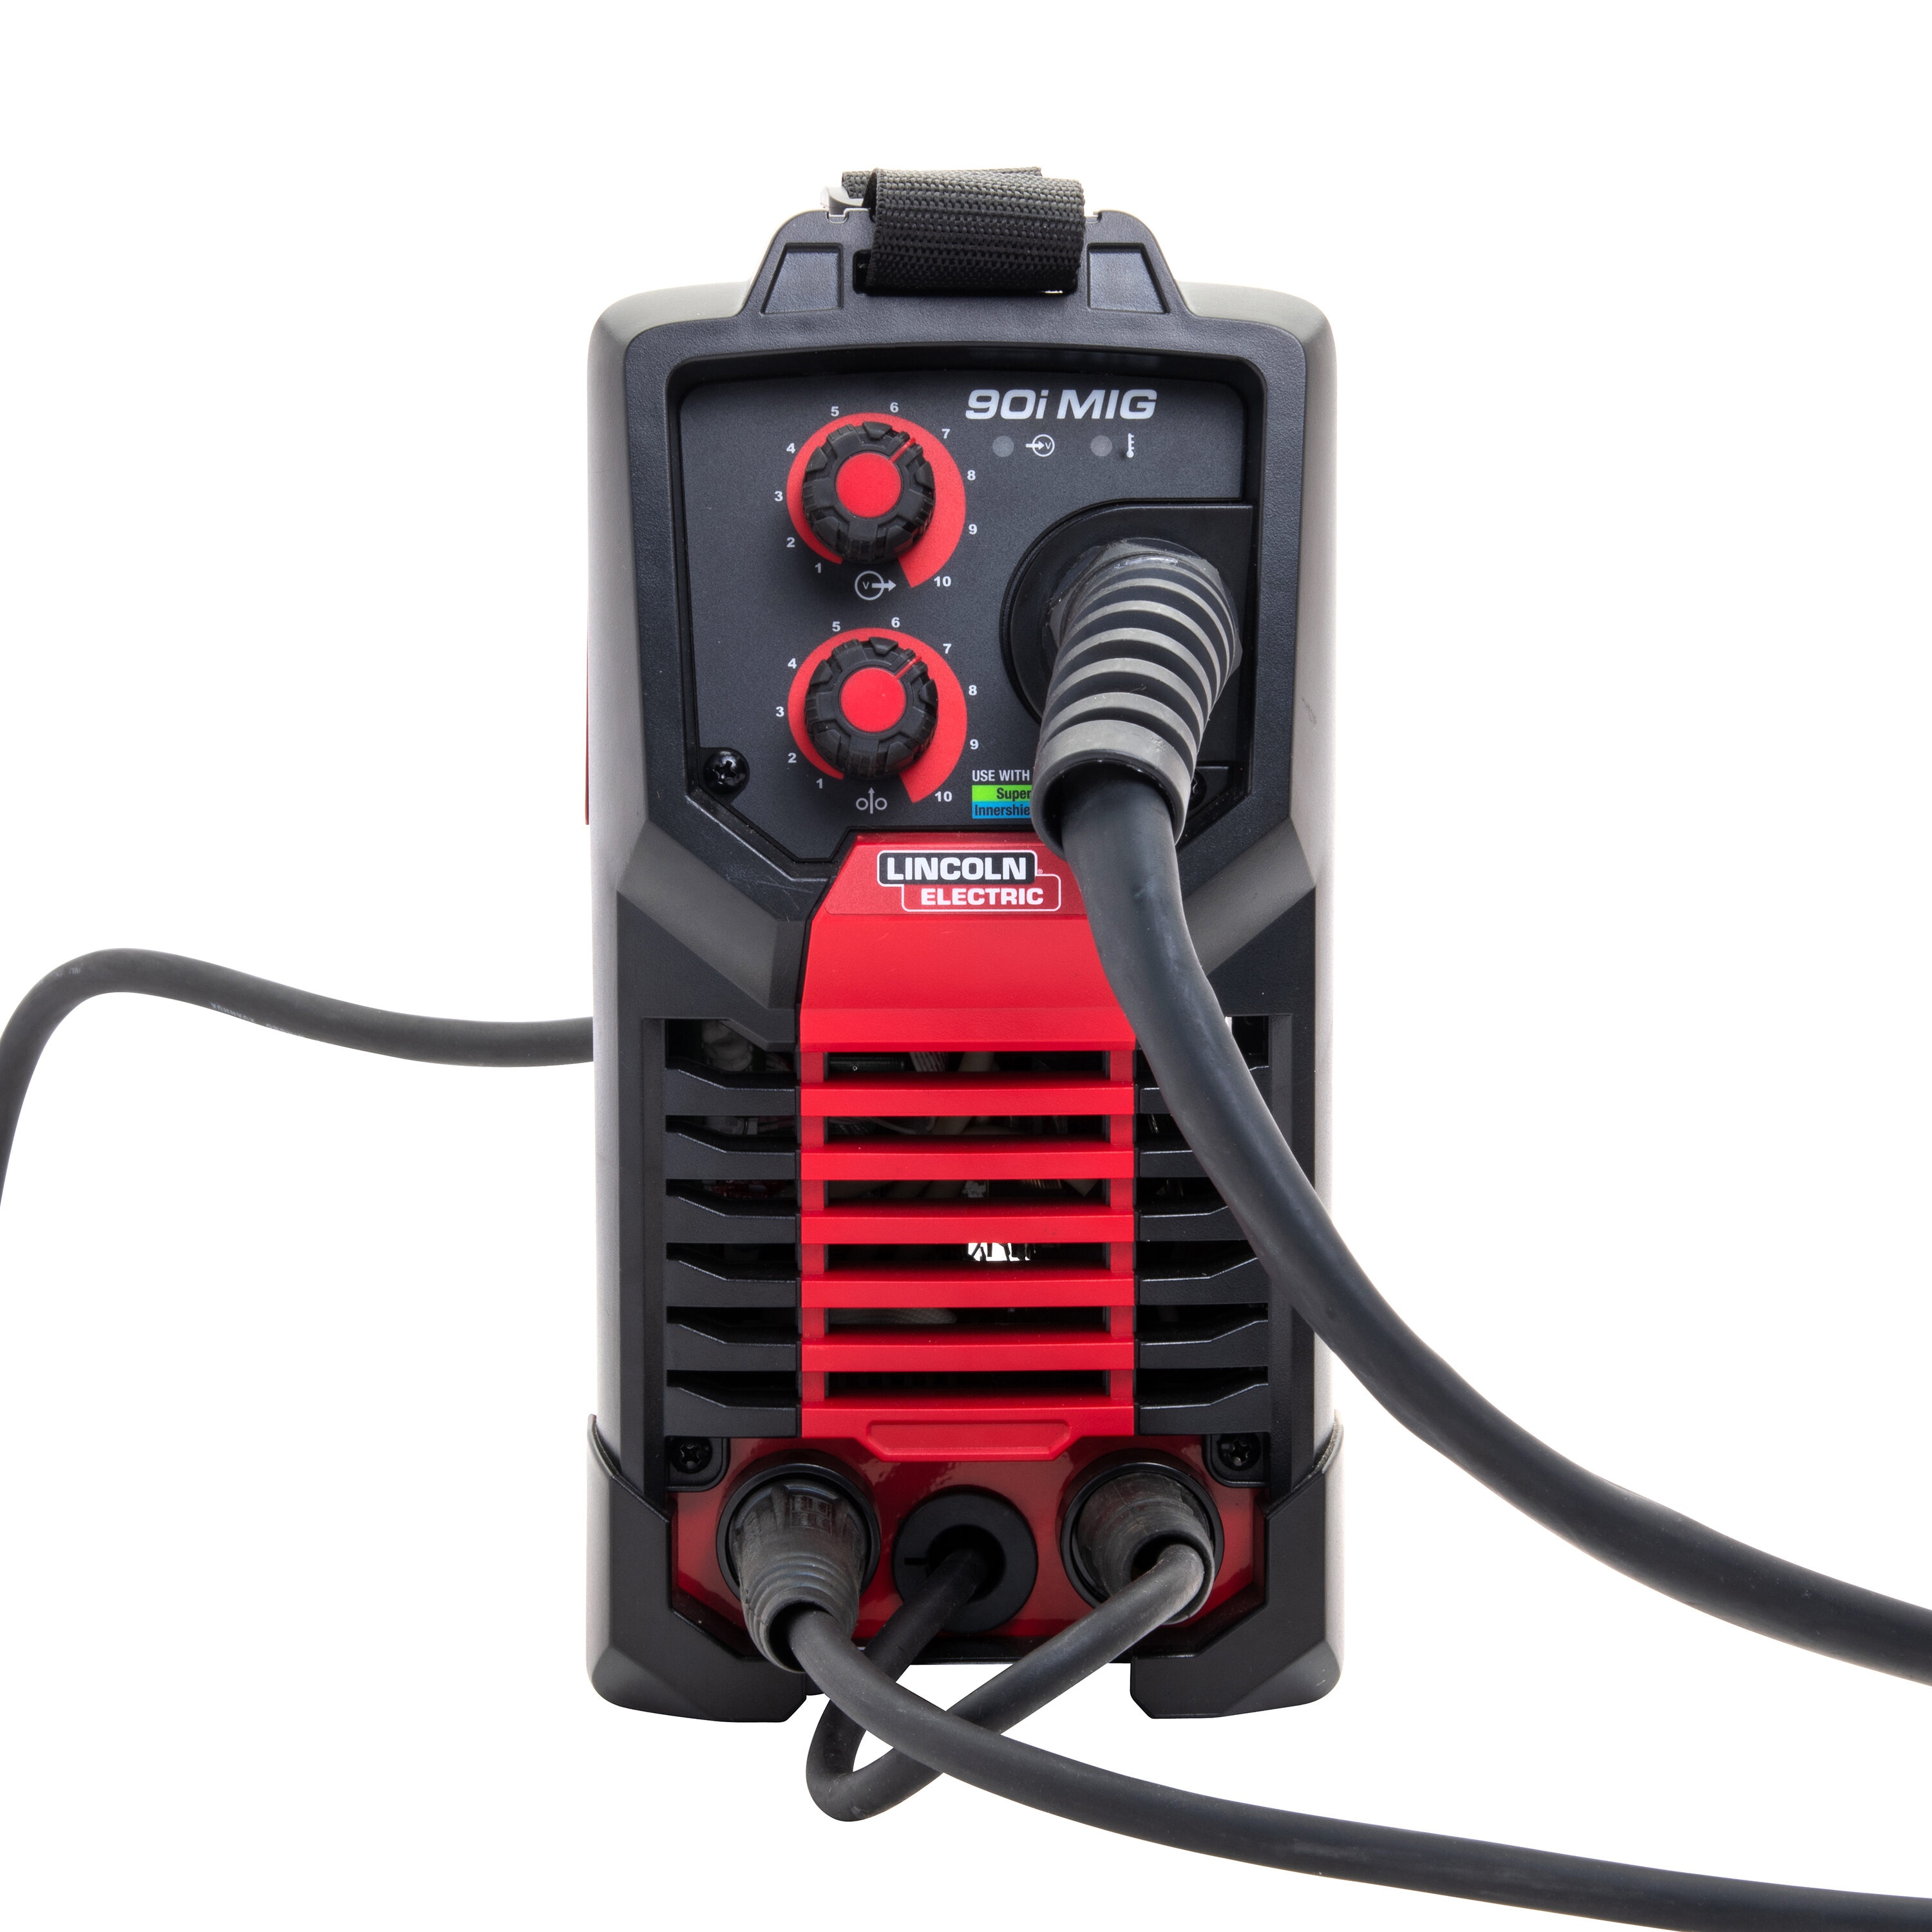 Lincoln Electric 90i MIG and Flux Core Wire Feed Weld-PAK Welder